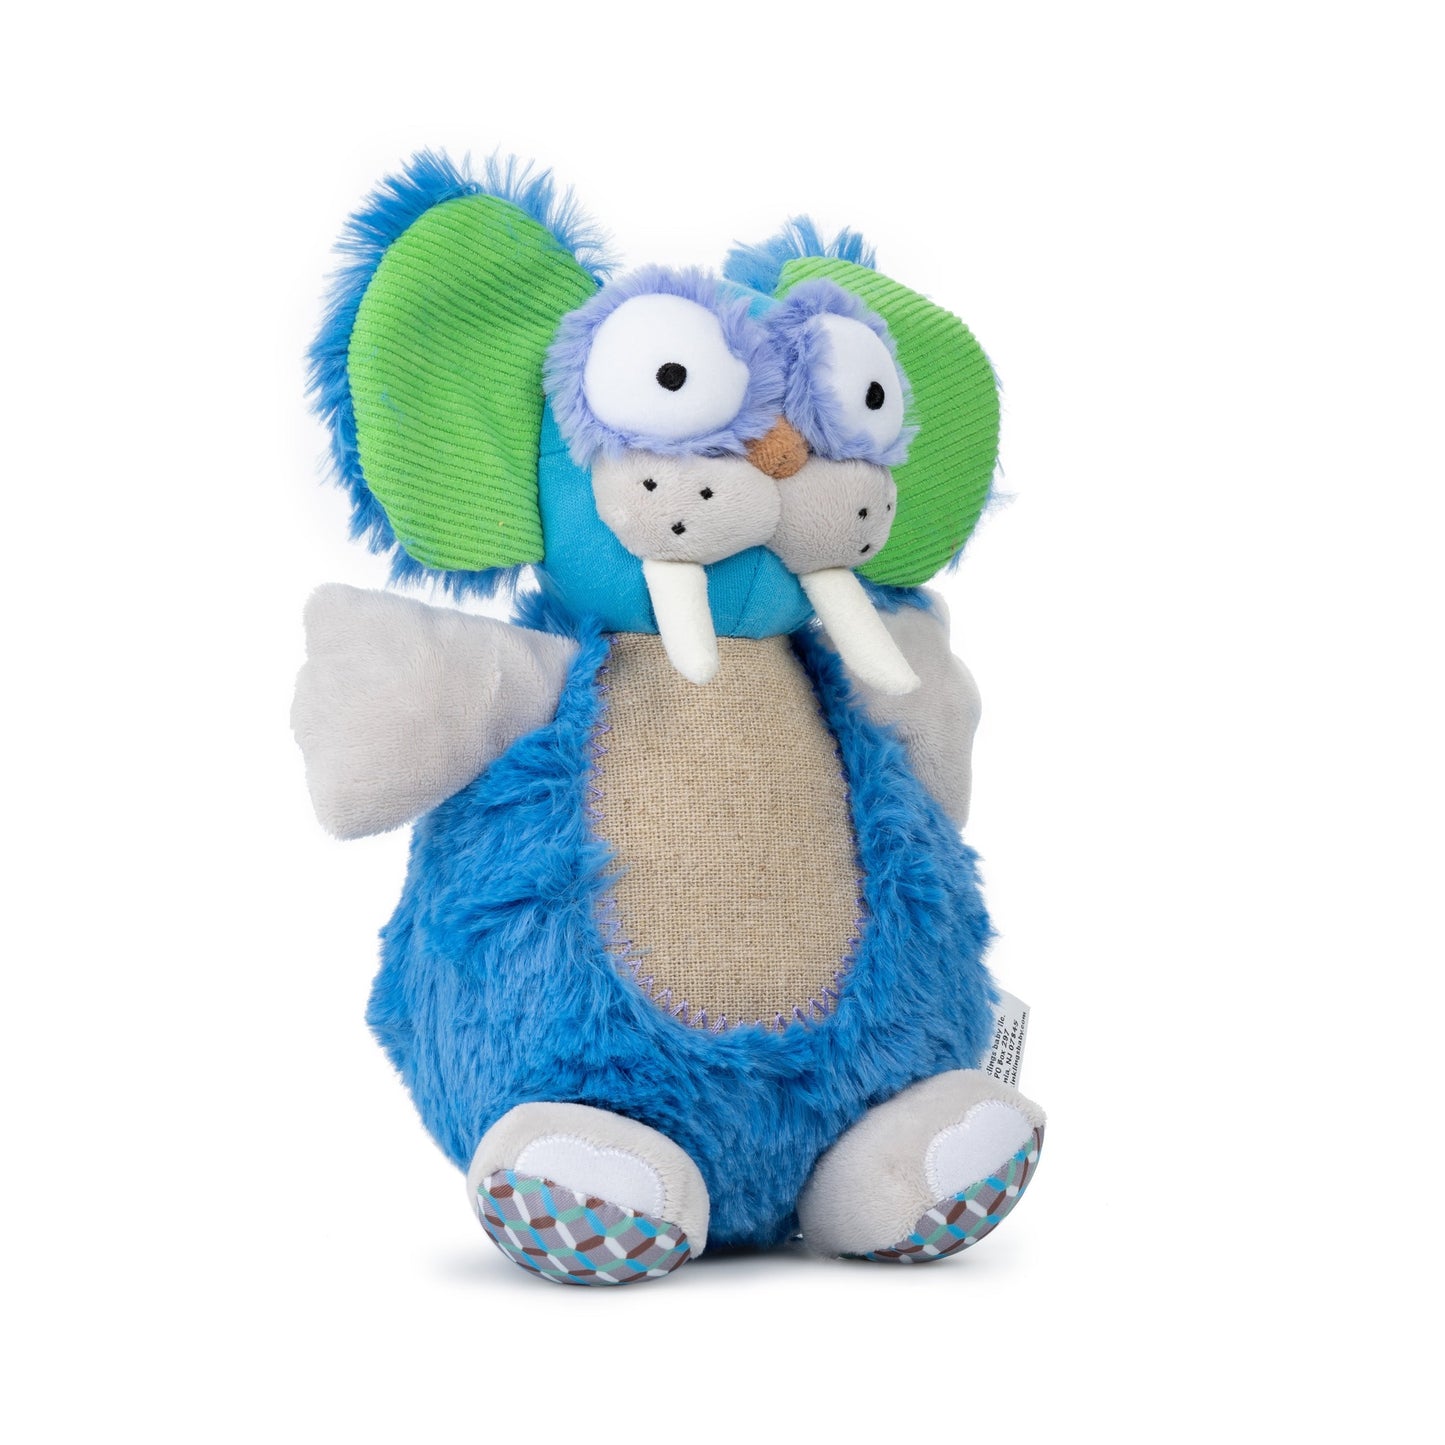 Gus the Toothy Tusked Rus Soft Toy